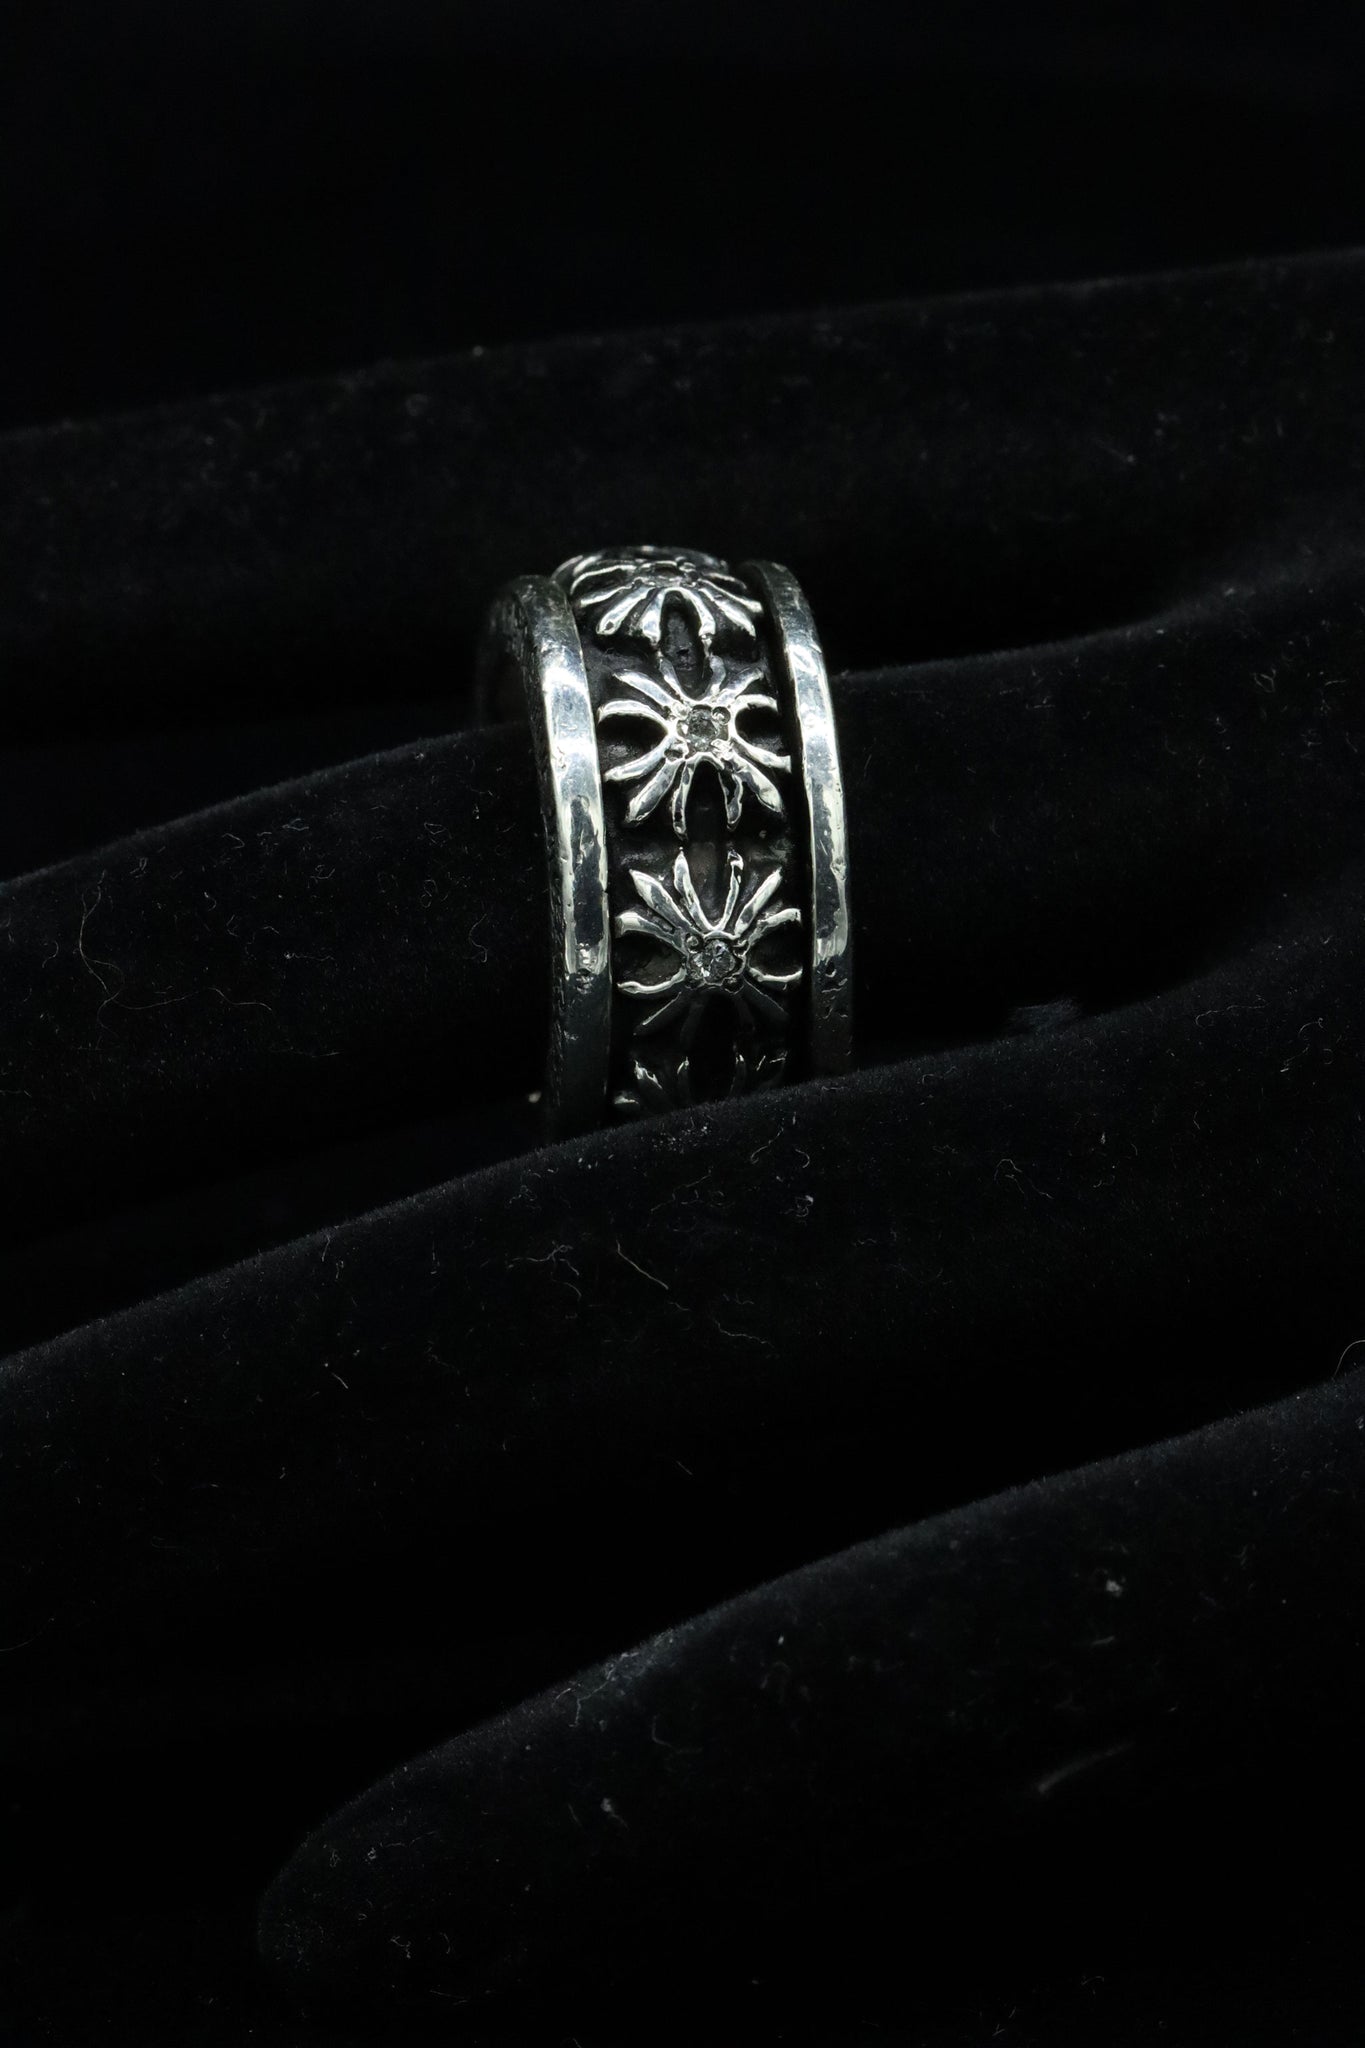 ***SOLD*** Authentic Chrome Hearts Spinner Ring in Sterling Silver with VS1 Diamonds on every Cross Size 9.5